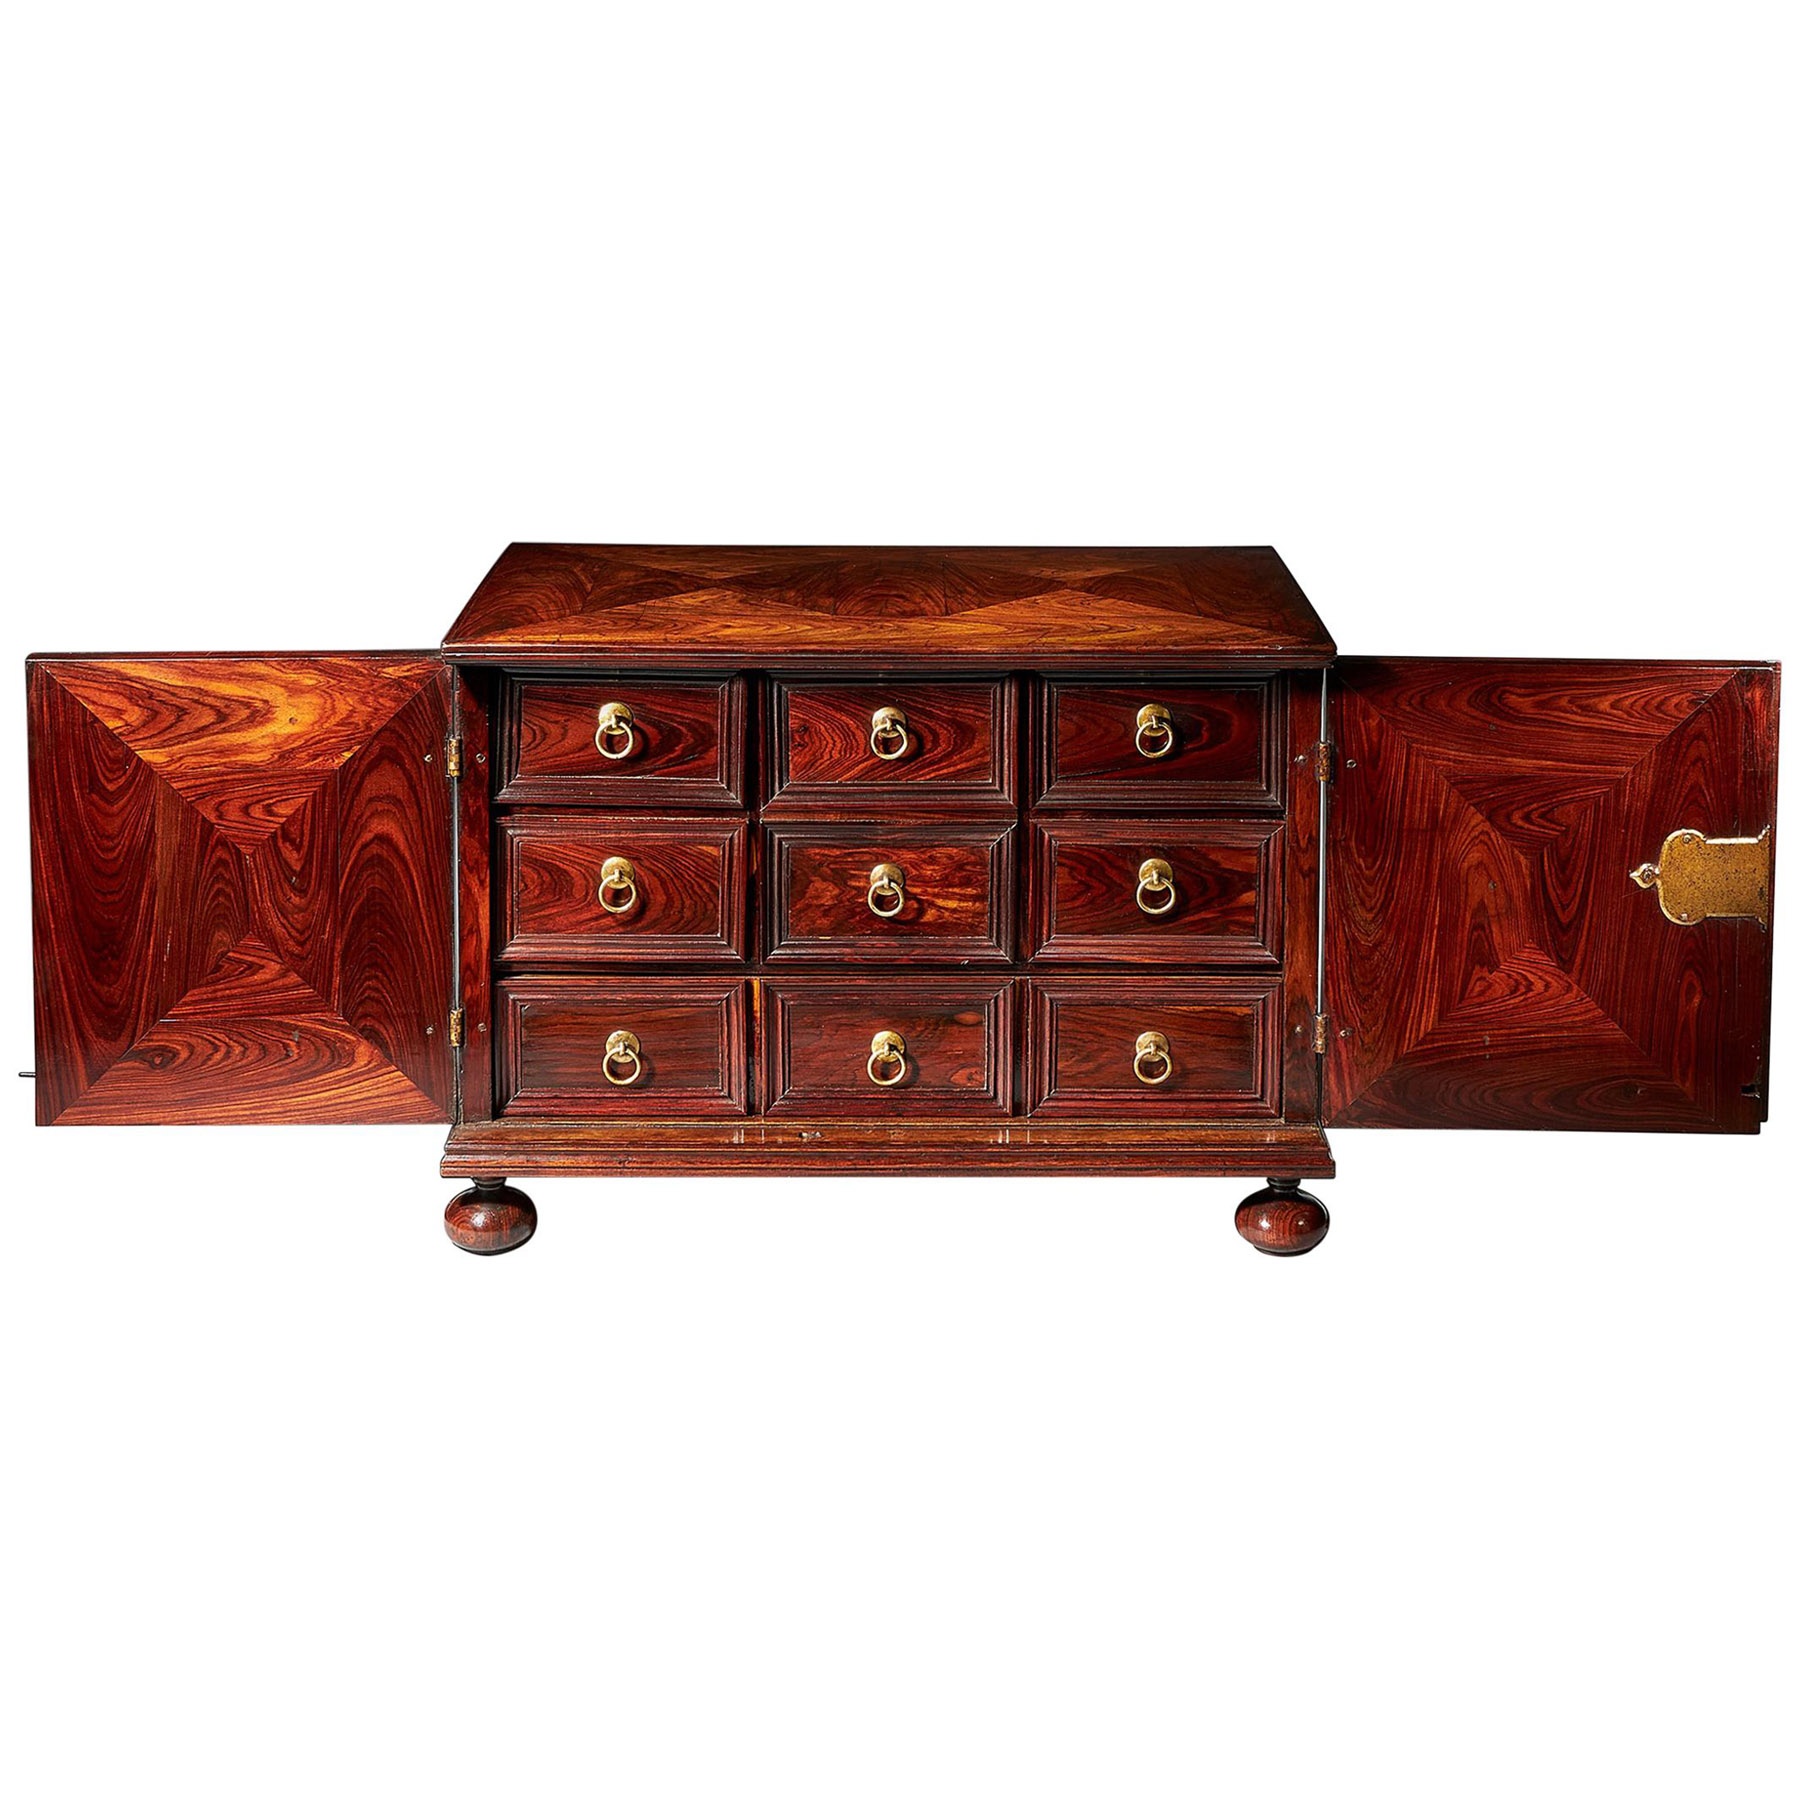 Extremely Rare and Fine Miniature Kingwood Table Cabinet from the Reign of Charles II 1